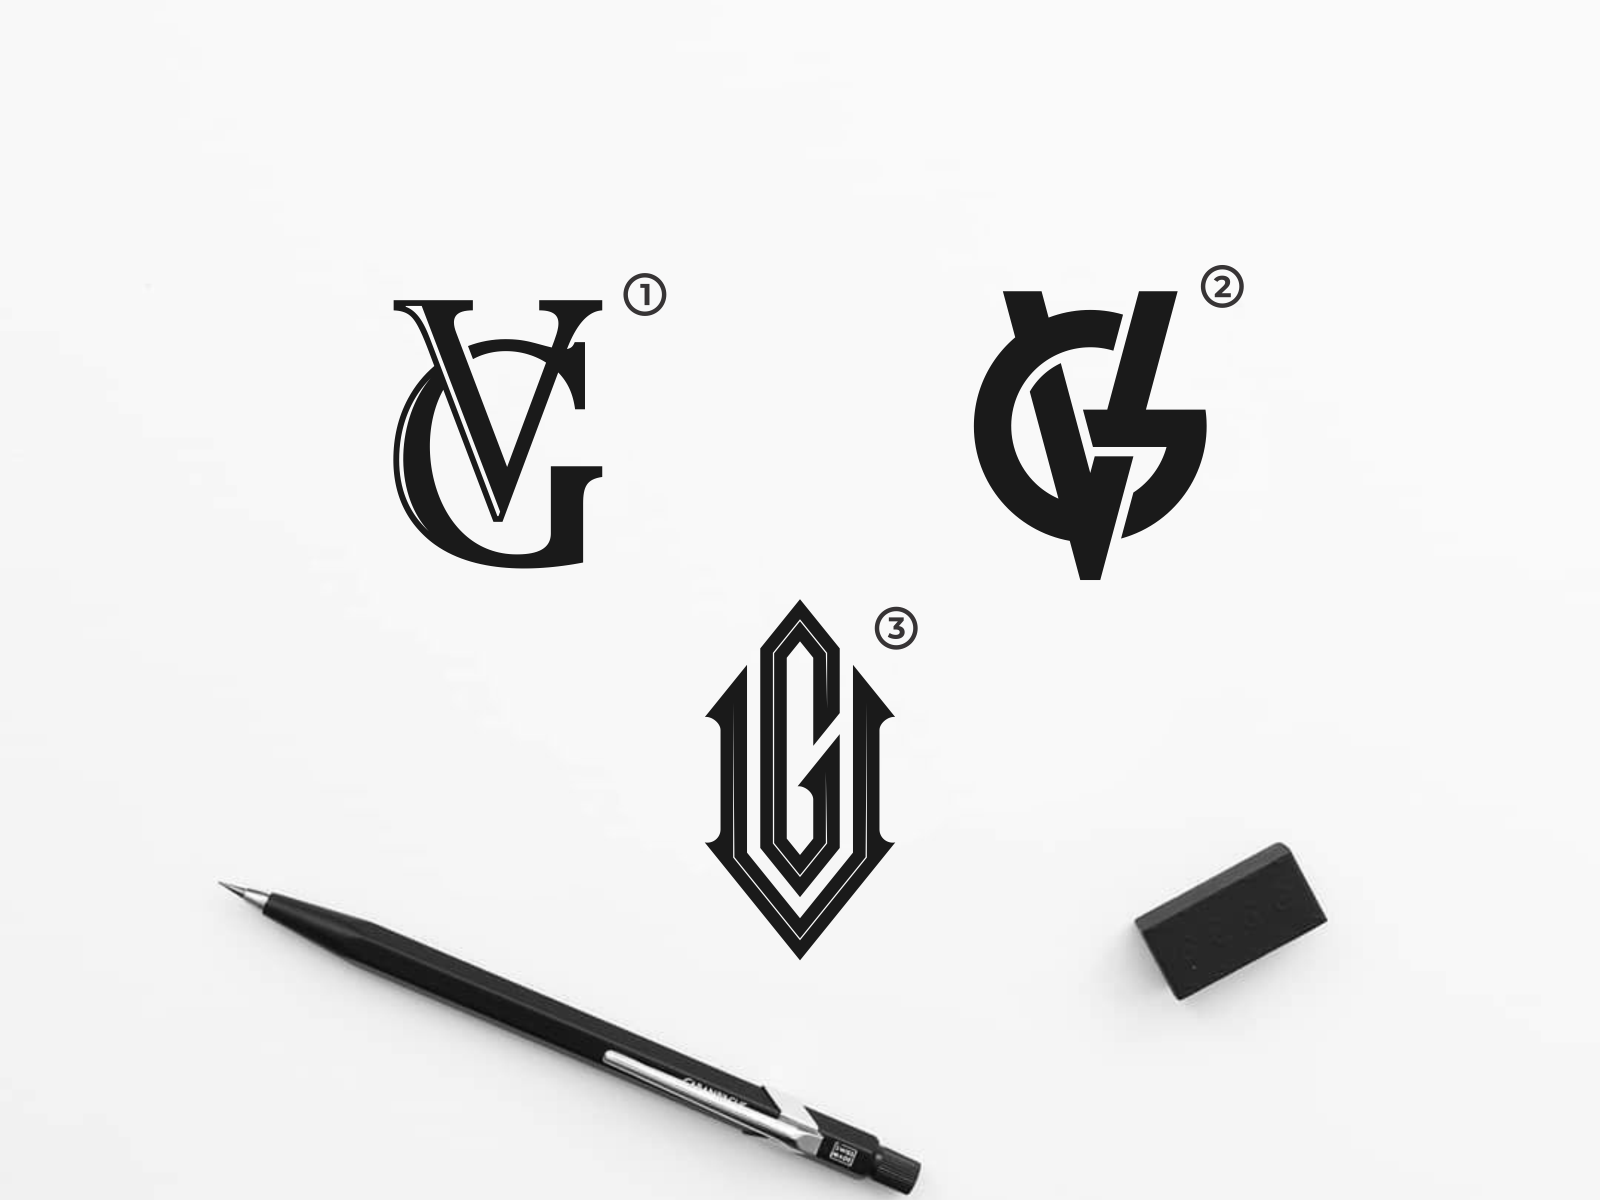 Creative Vg Letter With Luxury Concept Modern Vg Logo Design For Business  And Company Identity Stock Illustration - Download Image Now - iStock